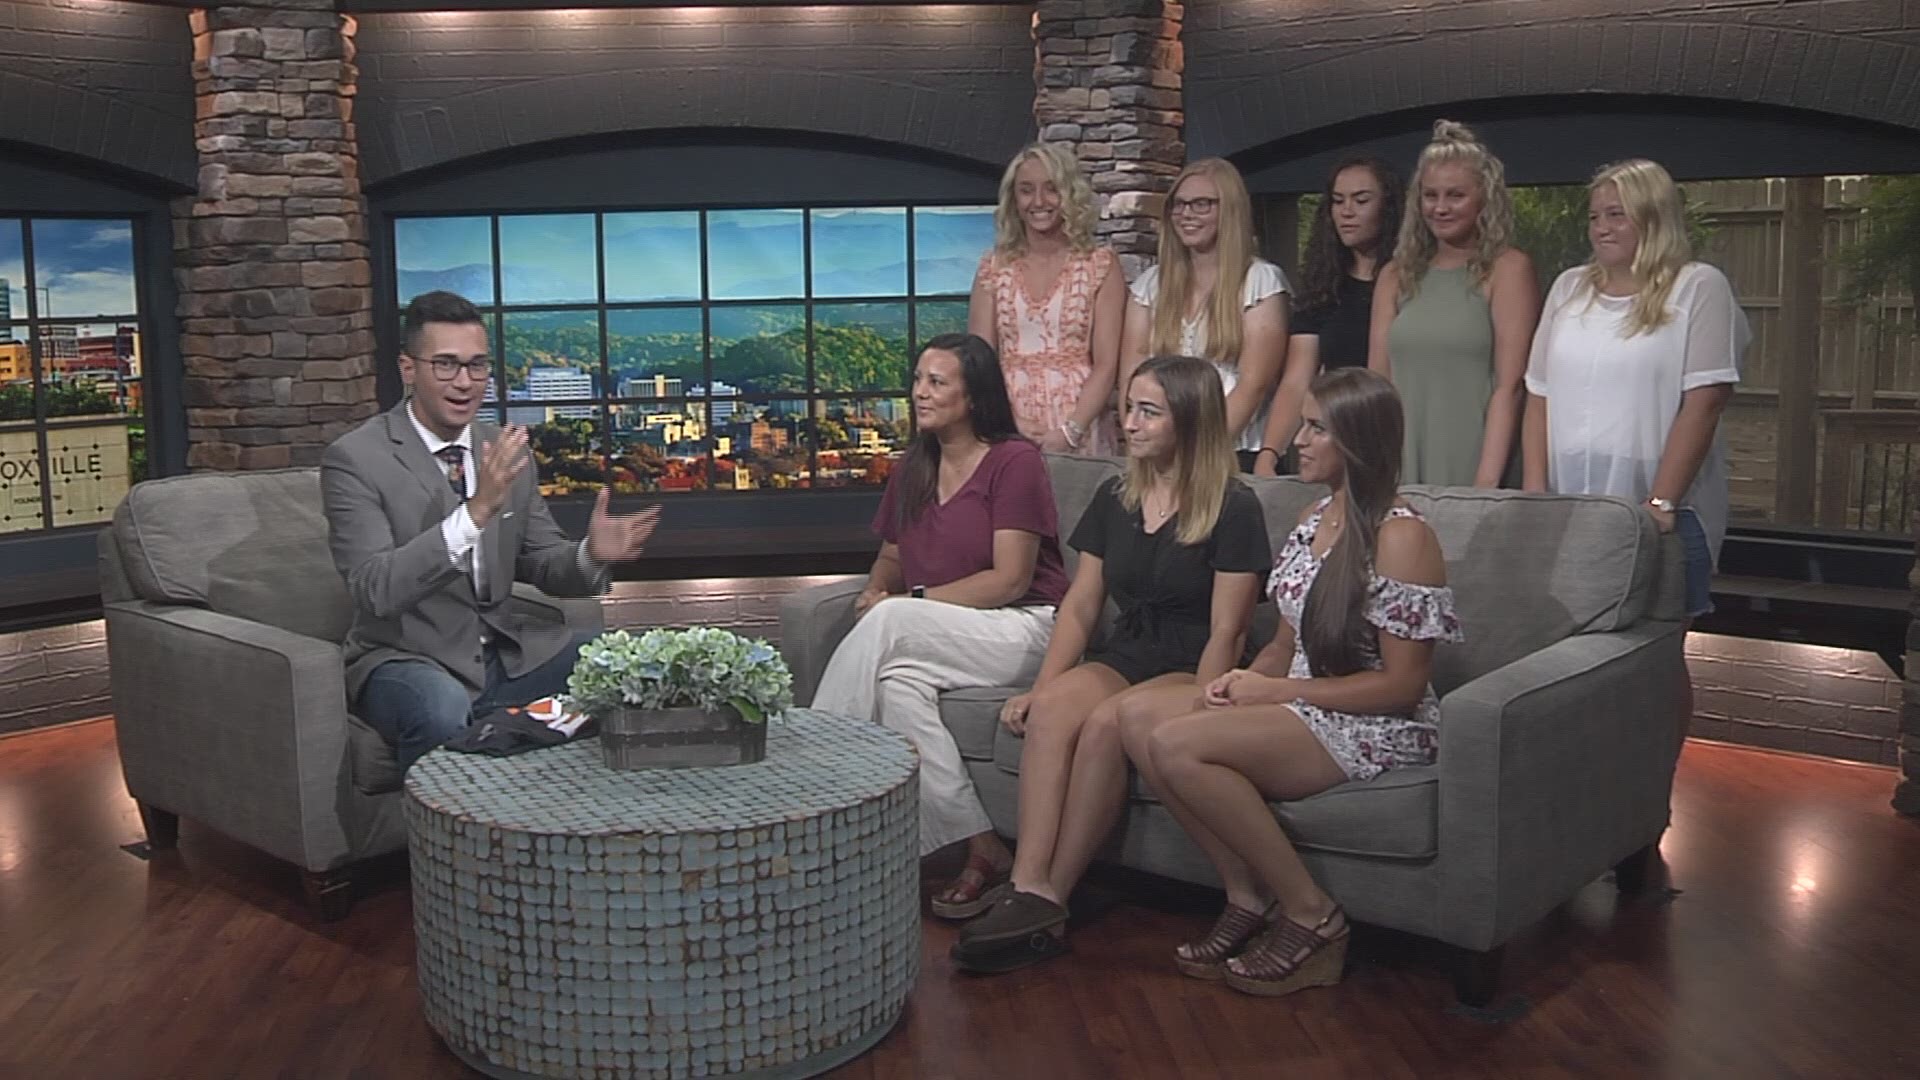 After winning a state title, the Lady Lions swing by the WBIR studio.